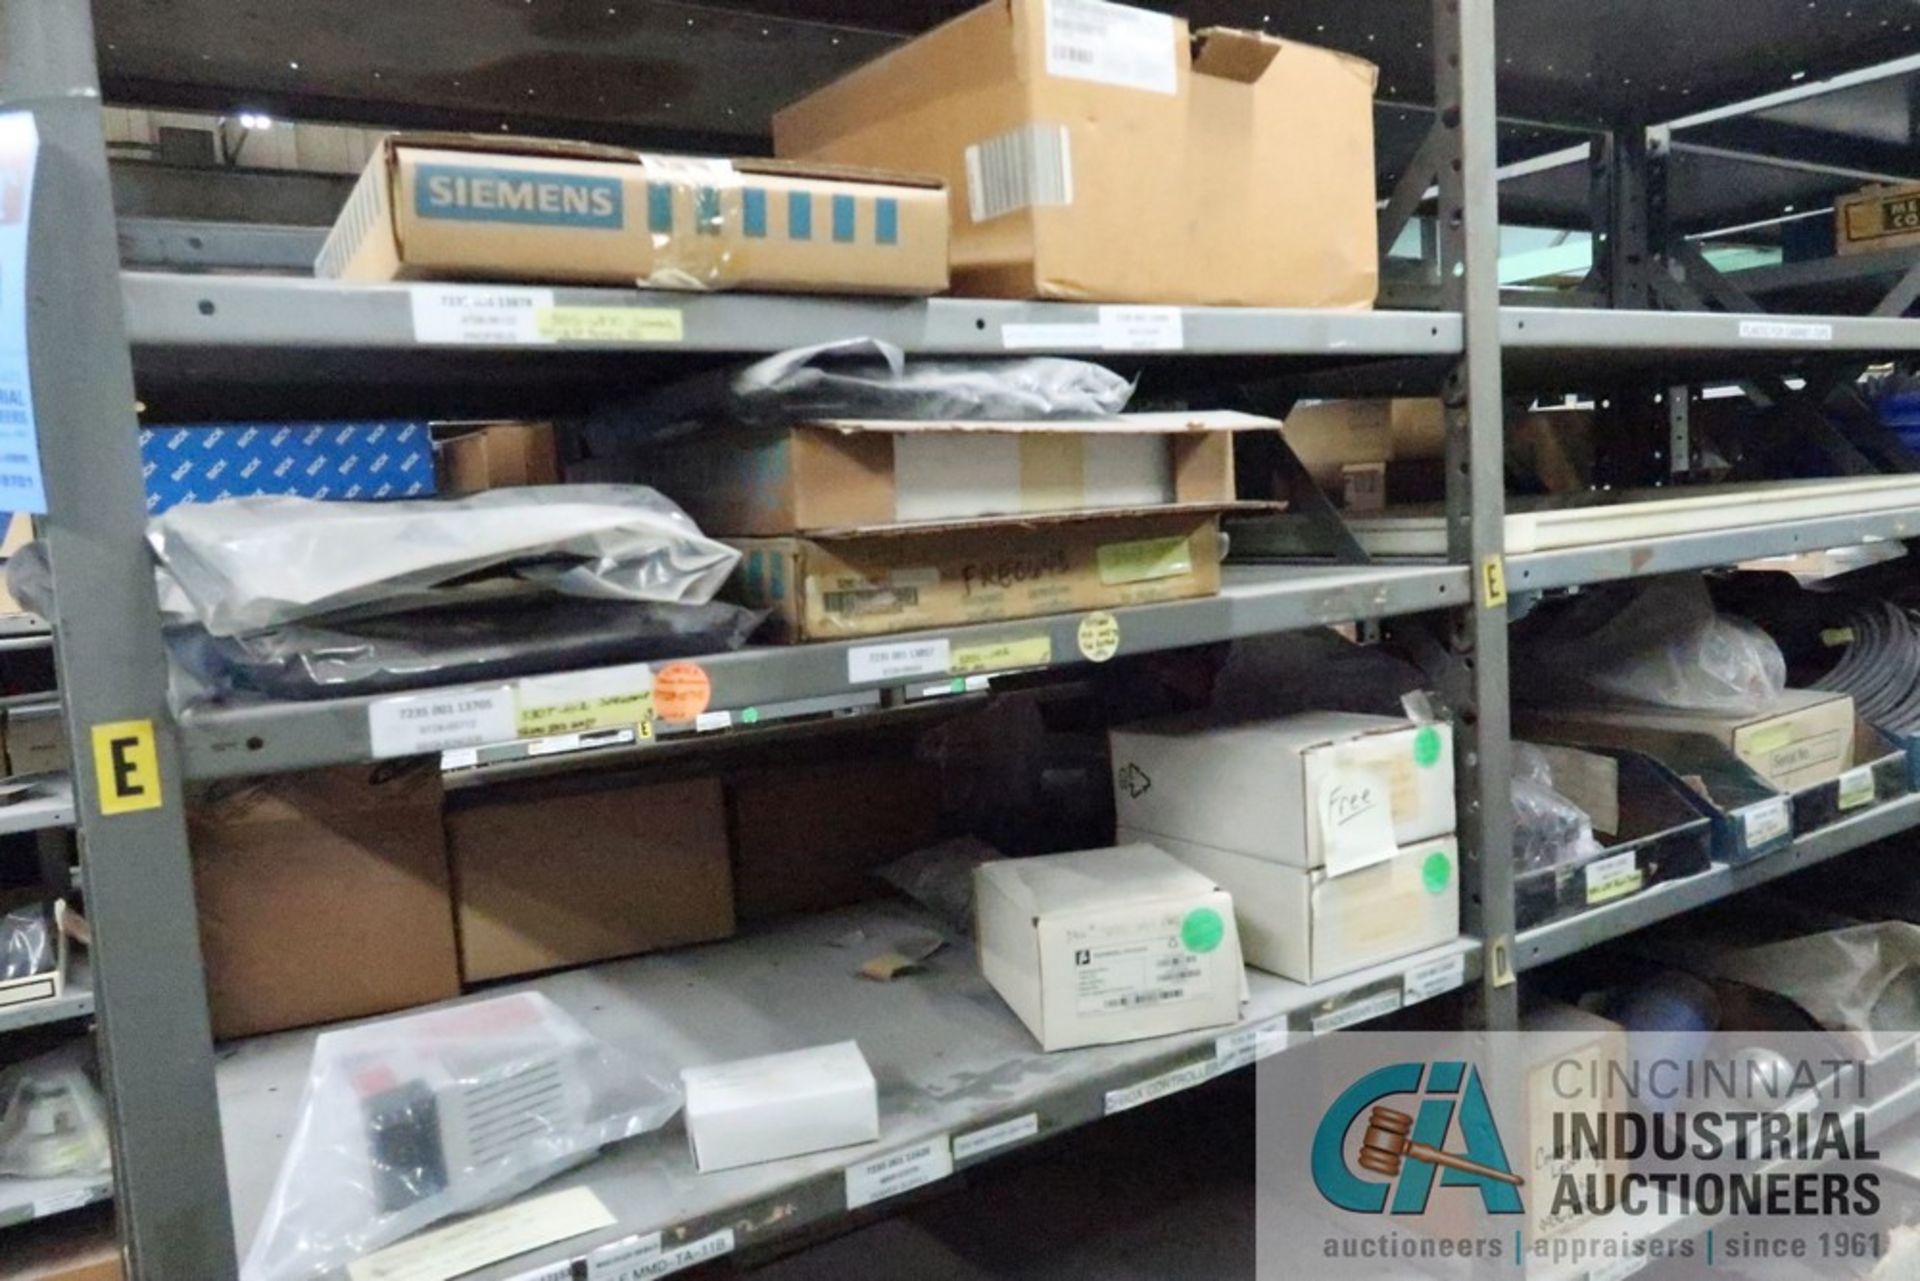 (LOT) (8) SECTIONS STEEL SHELVING W/ MISC. MODULES, CONTROLLERS, VELDING SYSTEMS, PUMPS, LIGHT - Image 3 of 16